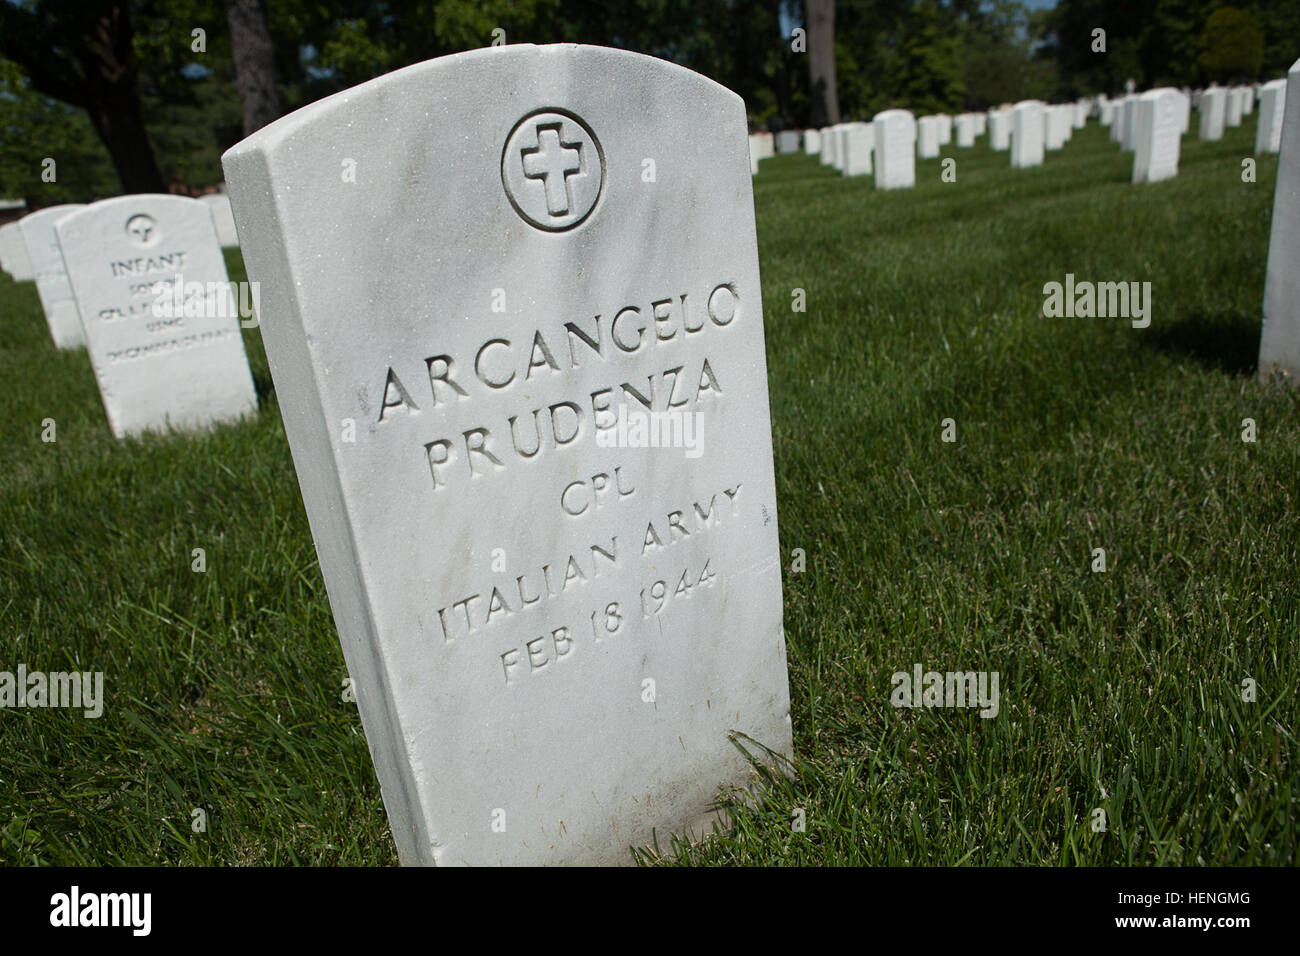 The grave of Italian Army Cpl. Arcangelo Prudenza, died Feb 18, 1944, is located in Section 15 of Arlington National Cemetery May 19,2014. Prudenza is identified as a prisoner of war on ANC’s website. (Joint Base Myer-Henderson Hall PAO photo by Rachel Larue) The mysteries of Section 15 140519-A-DZ999-857 Stock Photo